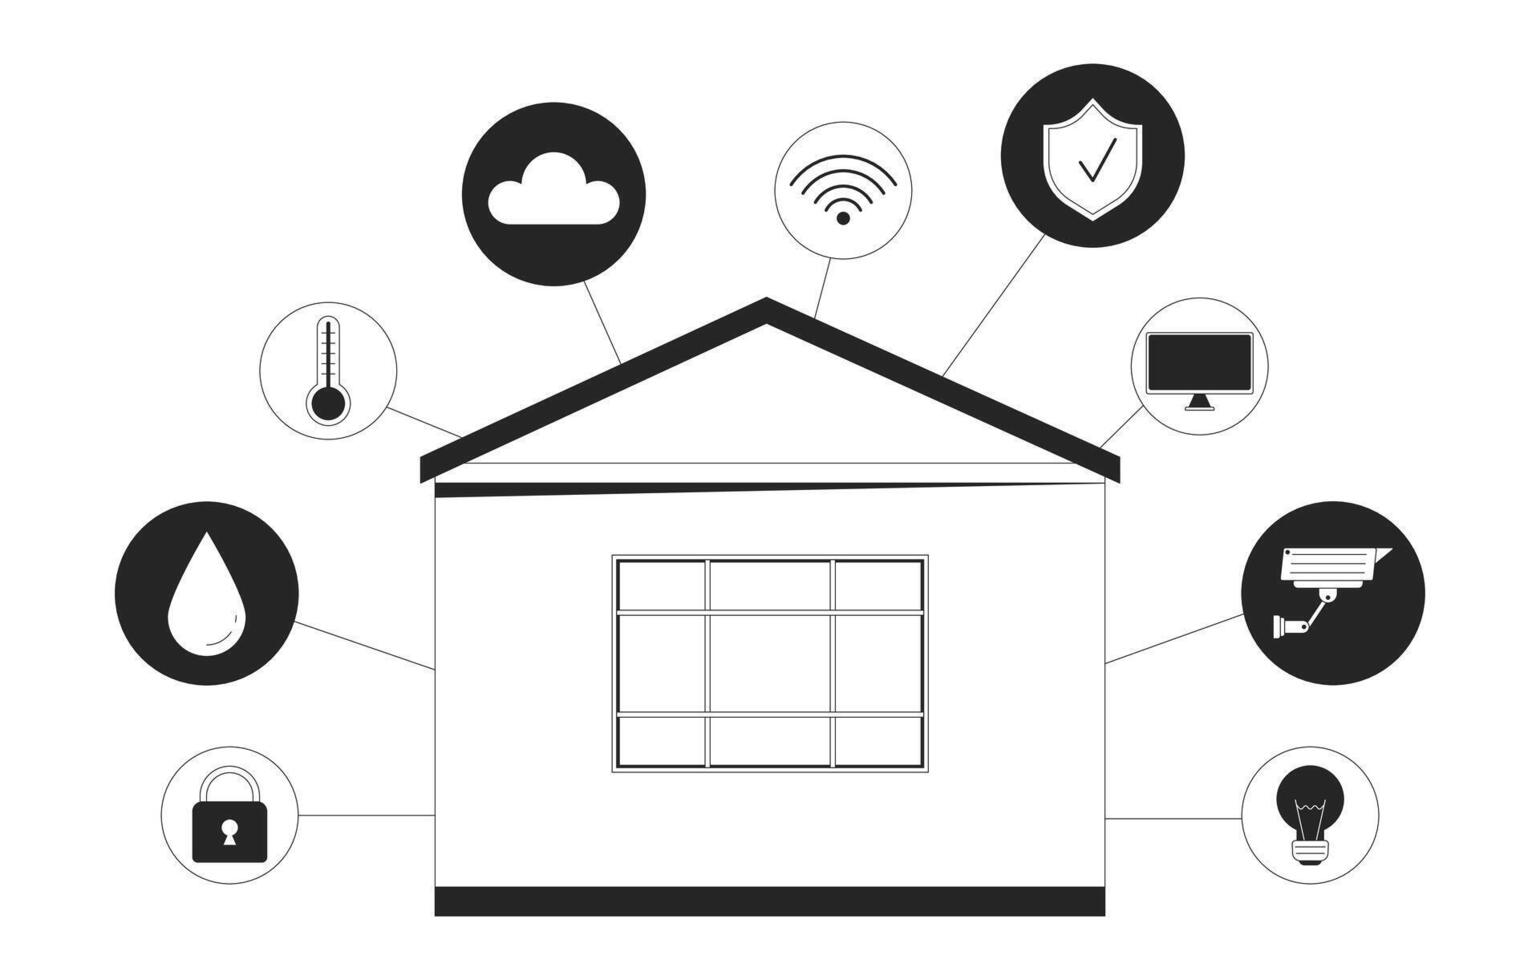 Smart home controls black and white 2D illustration concept. Security, thermostat, cloud technology cartoon outline object isolated on white. Automate connected devices metaphor monochrome art vector